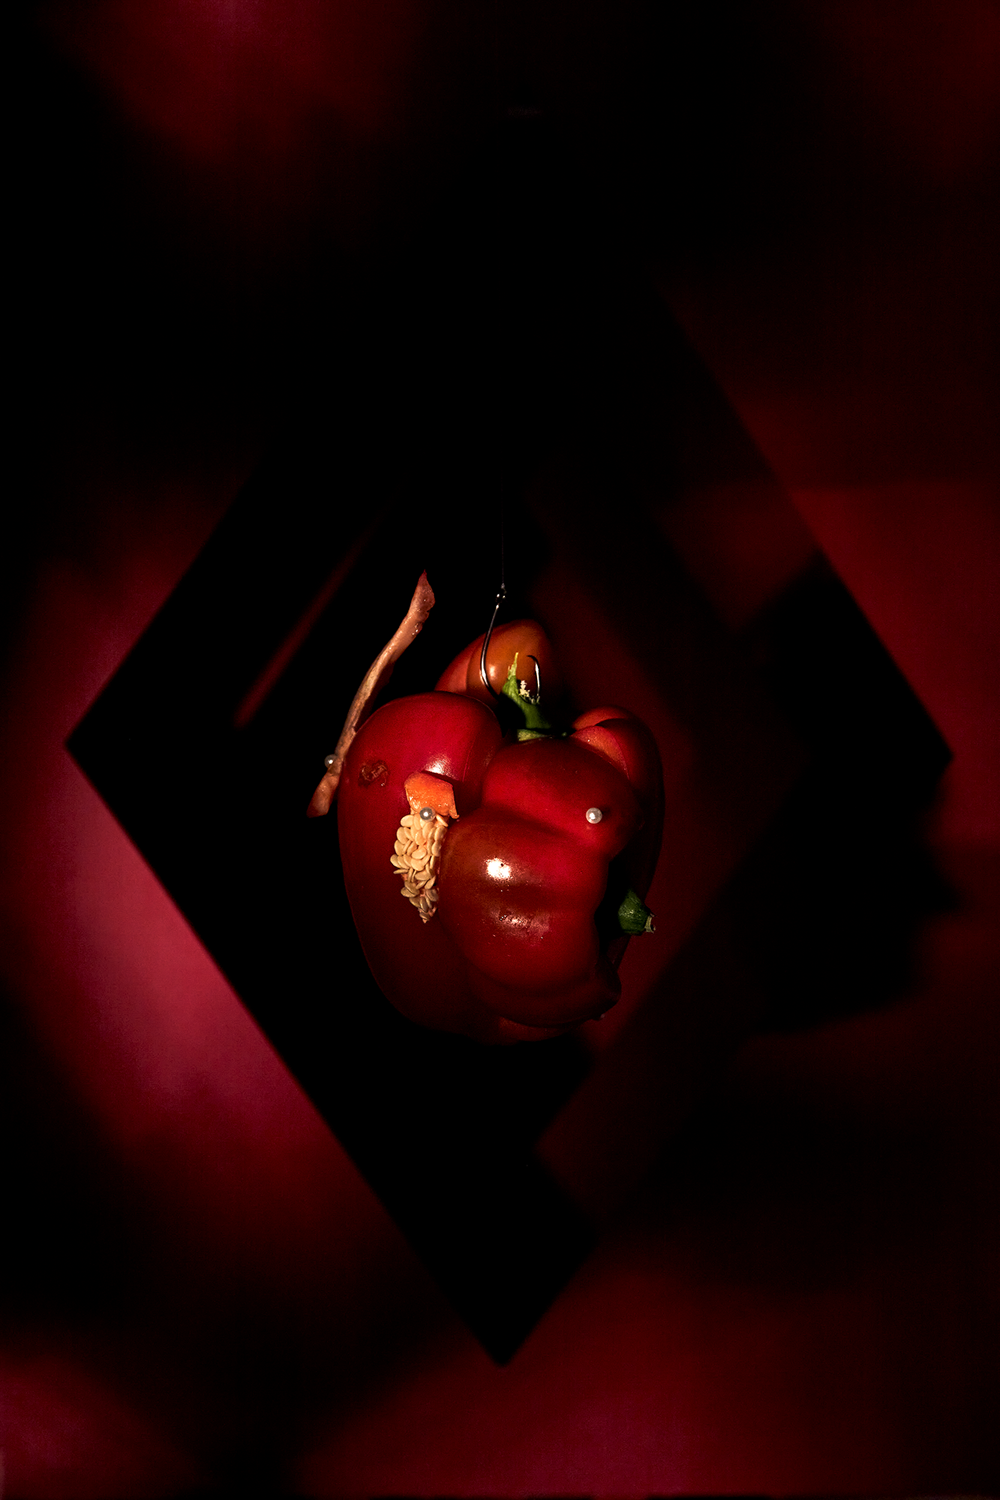 Colour photograph of capsicum hanging in a red diamond formation in red dappled light.